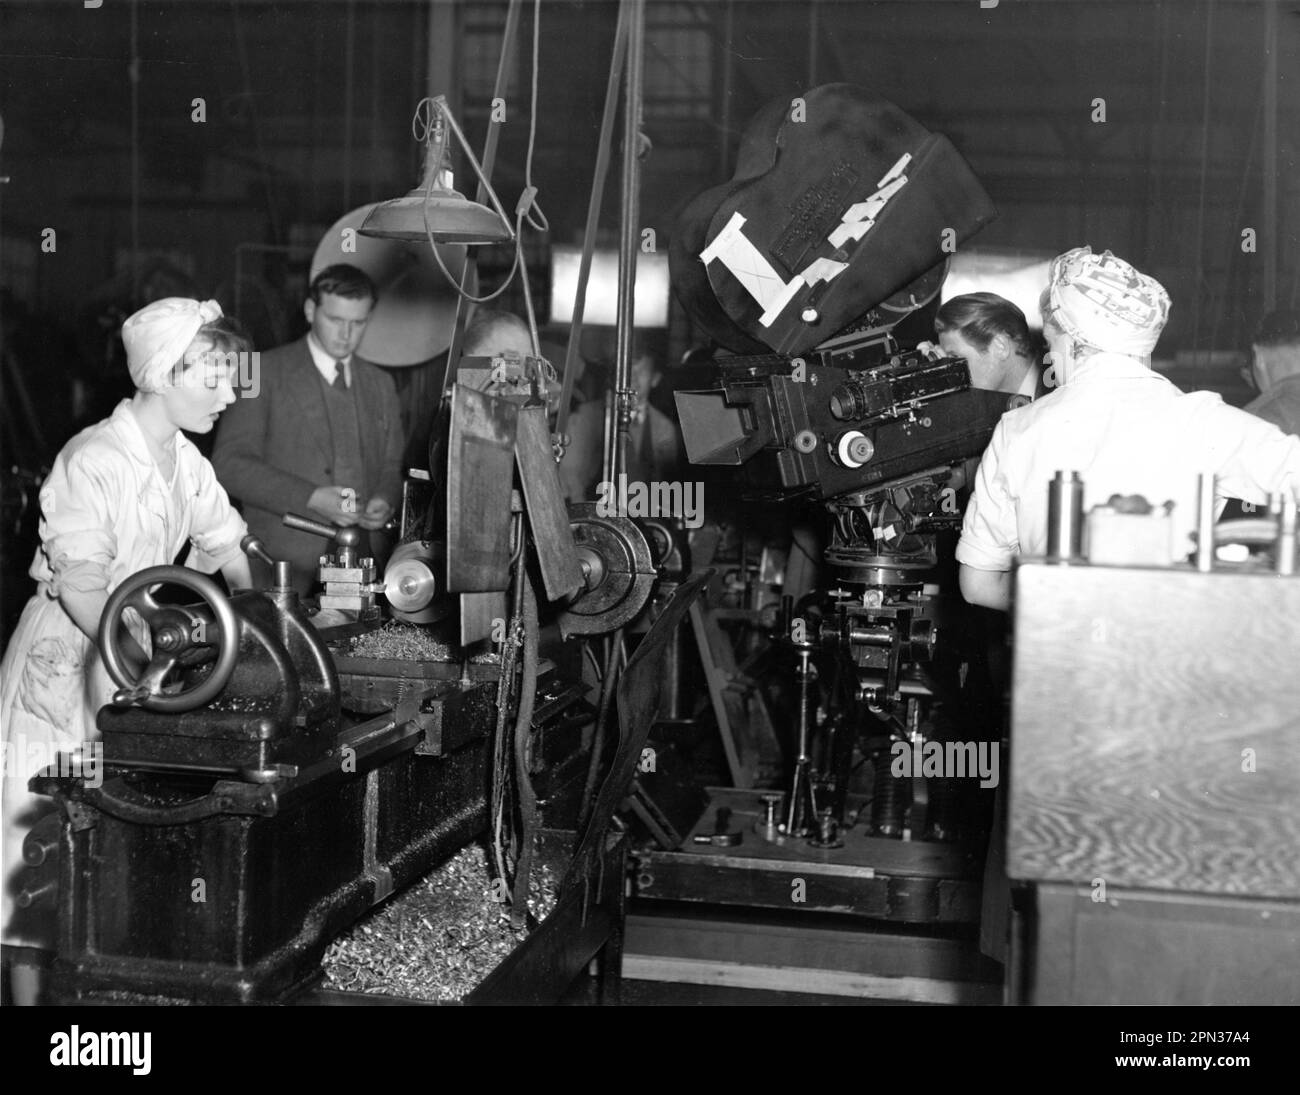 PETULA CLARK and DIANA DORS (back to camera) as factory girls on set candid with Film Crew during filming of DANCE HALL 1950 director CHARLES CRICHTON original screenplay E.V.H. Emmett Diana Morgan and Alexander Mackendrick cinematographer Douglas Slocombe art direction Norman G. Arnold producer Michael Balcon Ealing Studios / Stock Photo